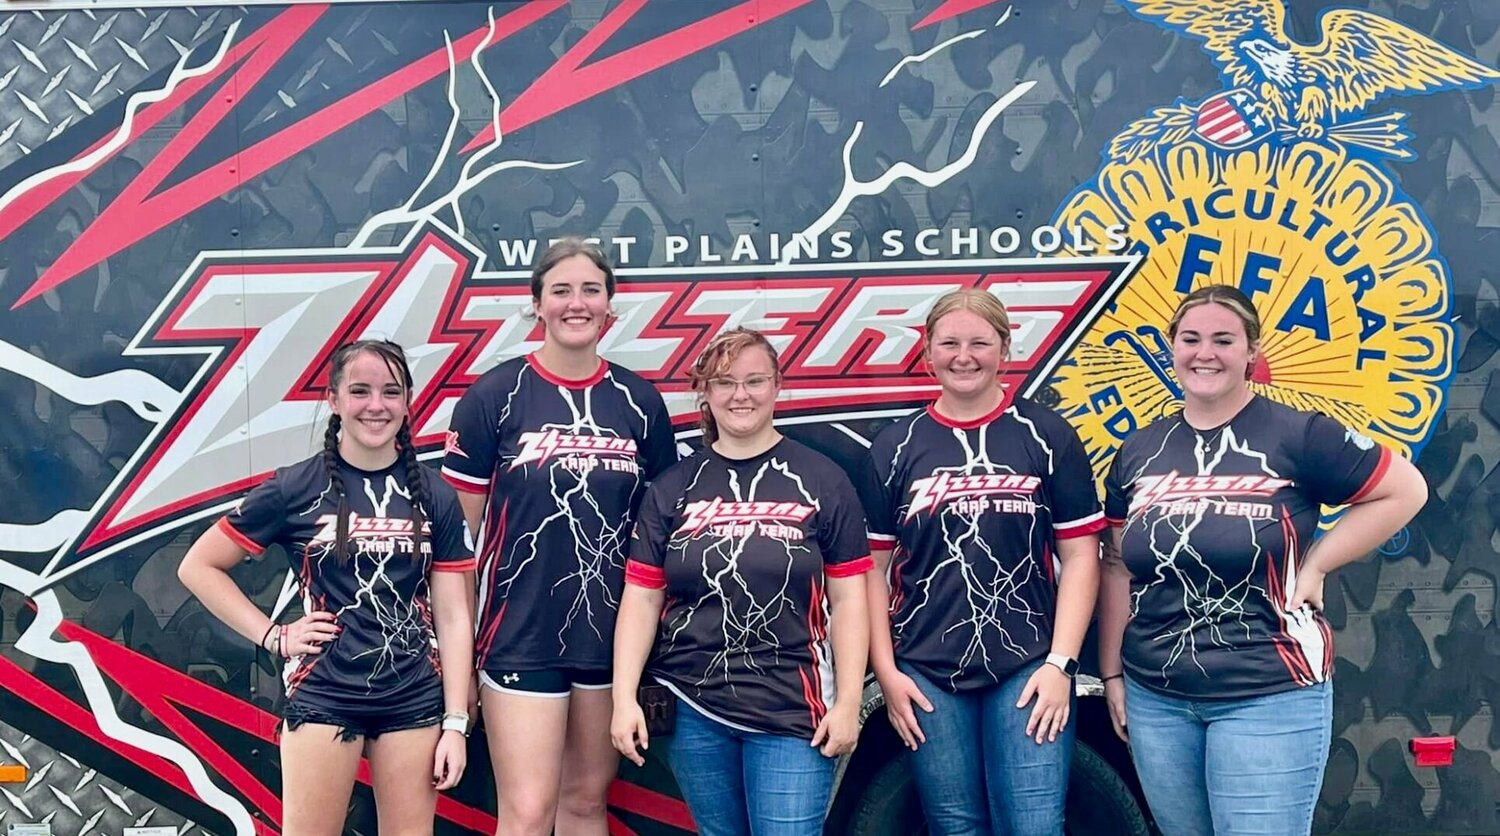 West Plains FFA girls trapshooting team members took second place in the AIM Grand National Youth Trapshooting Championships in Sparta, Ill. From left, they are Ava Cooper, Macie Doss, Anna Dame, Lily York and Shelby Moore.